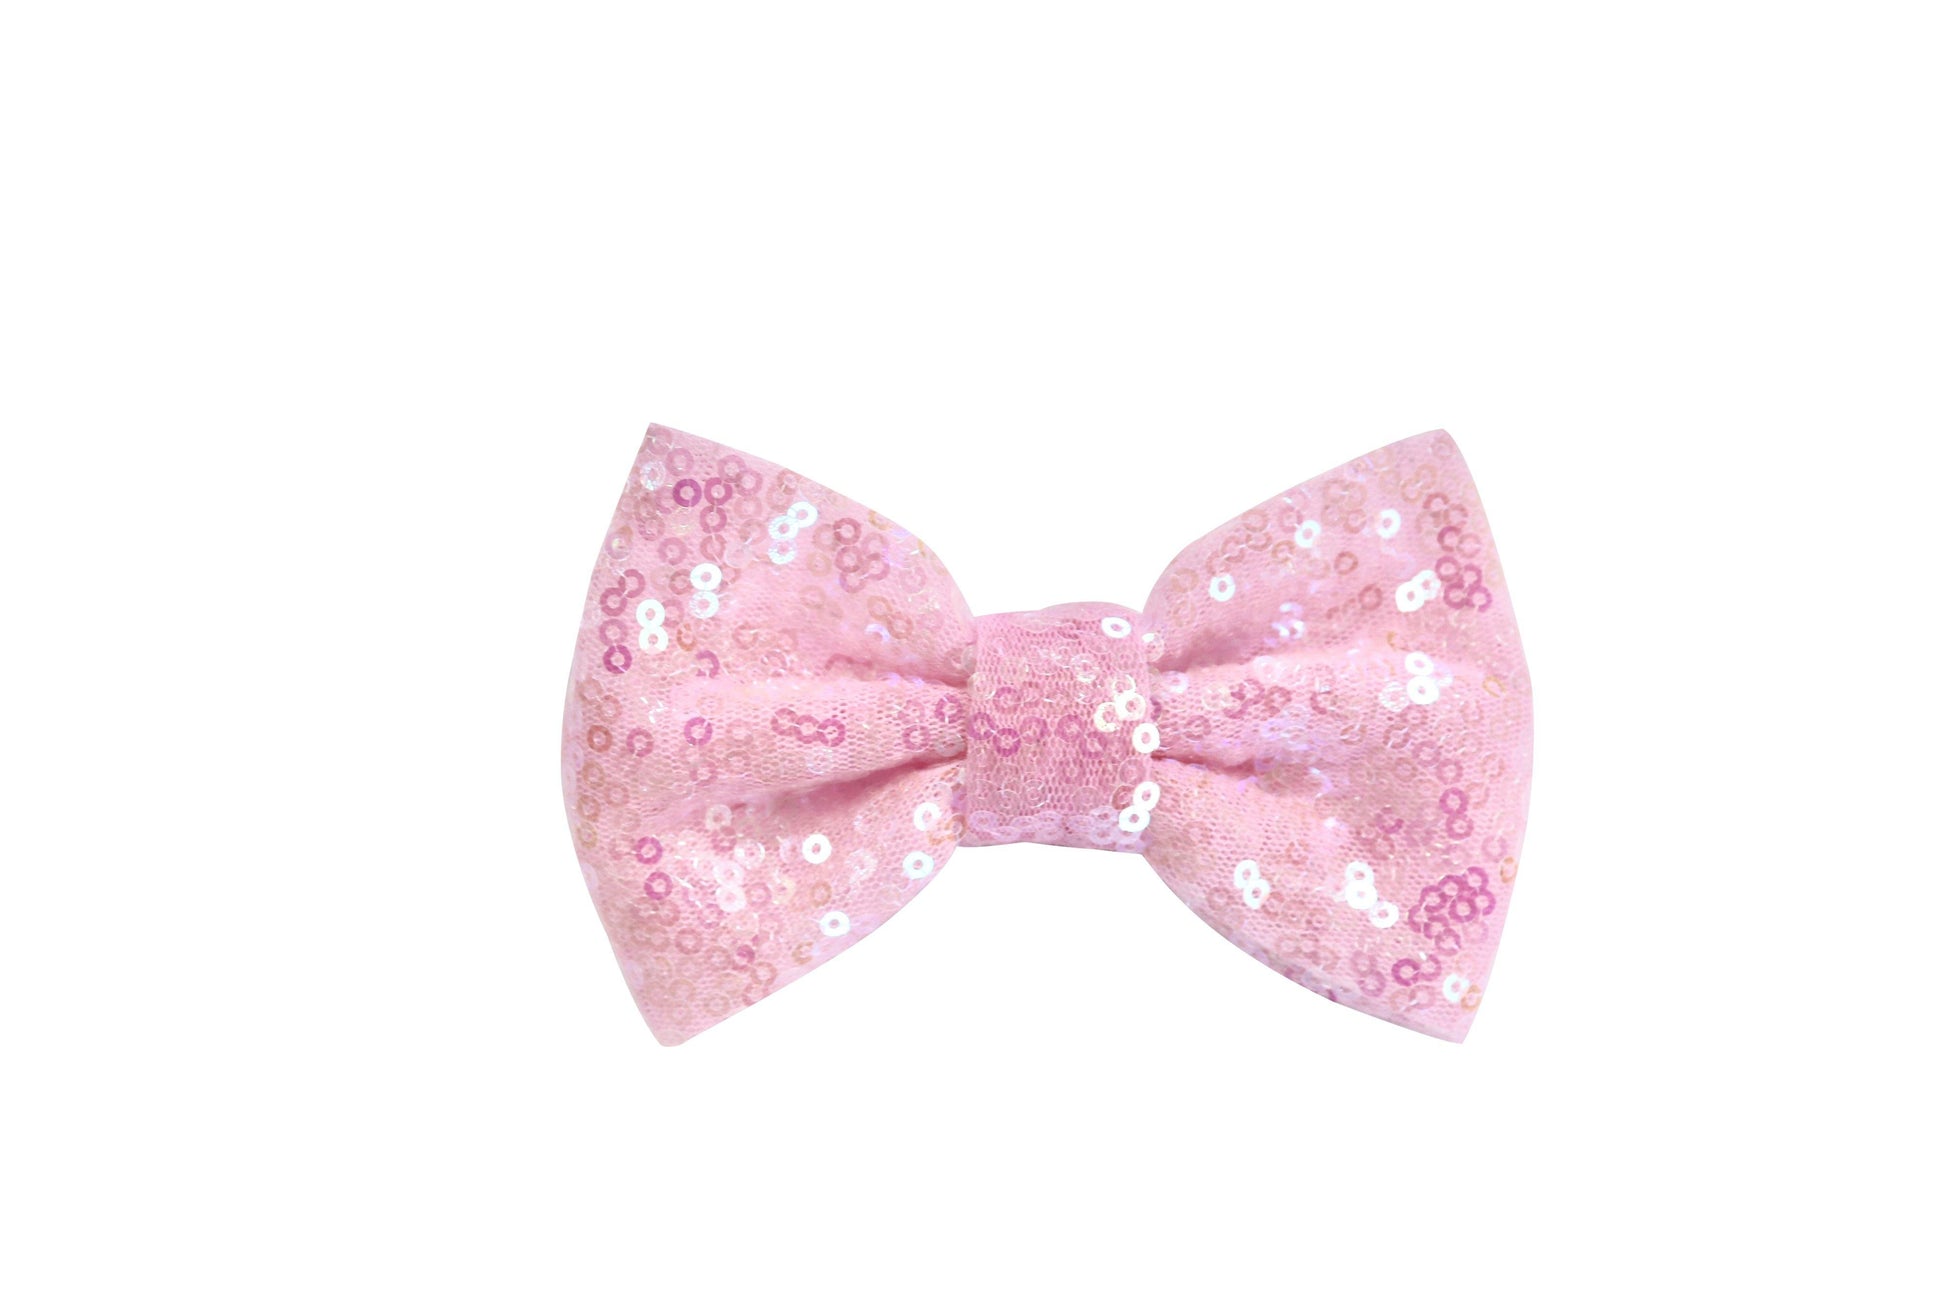 4" IRIDESCENT Large Sequin Bow - Pretty in Pink Supply